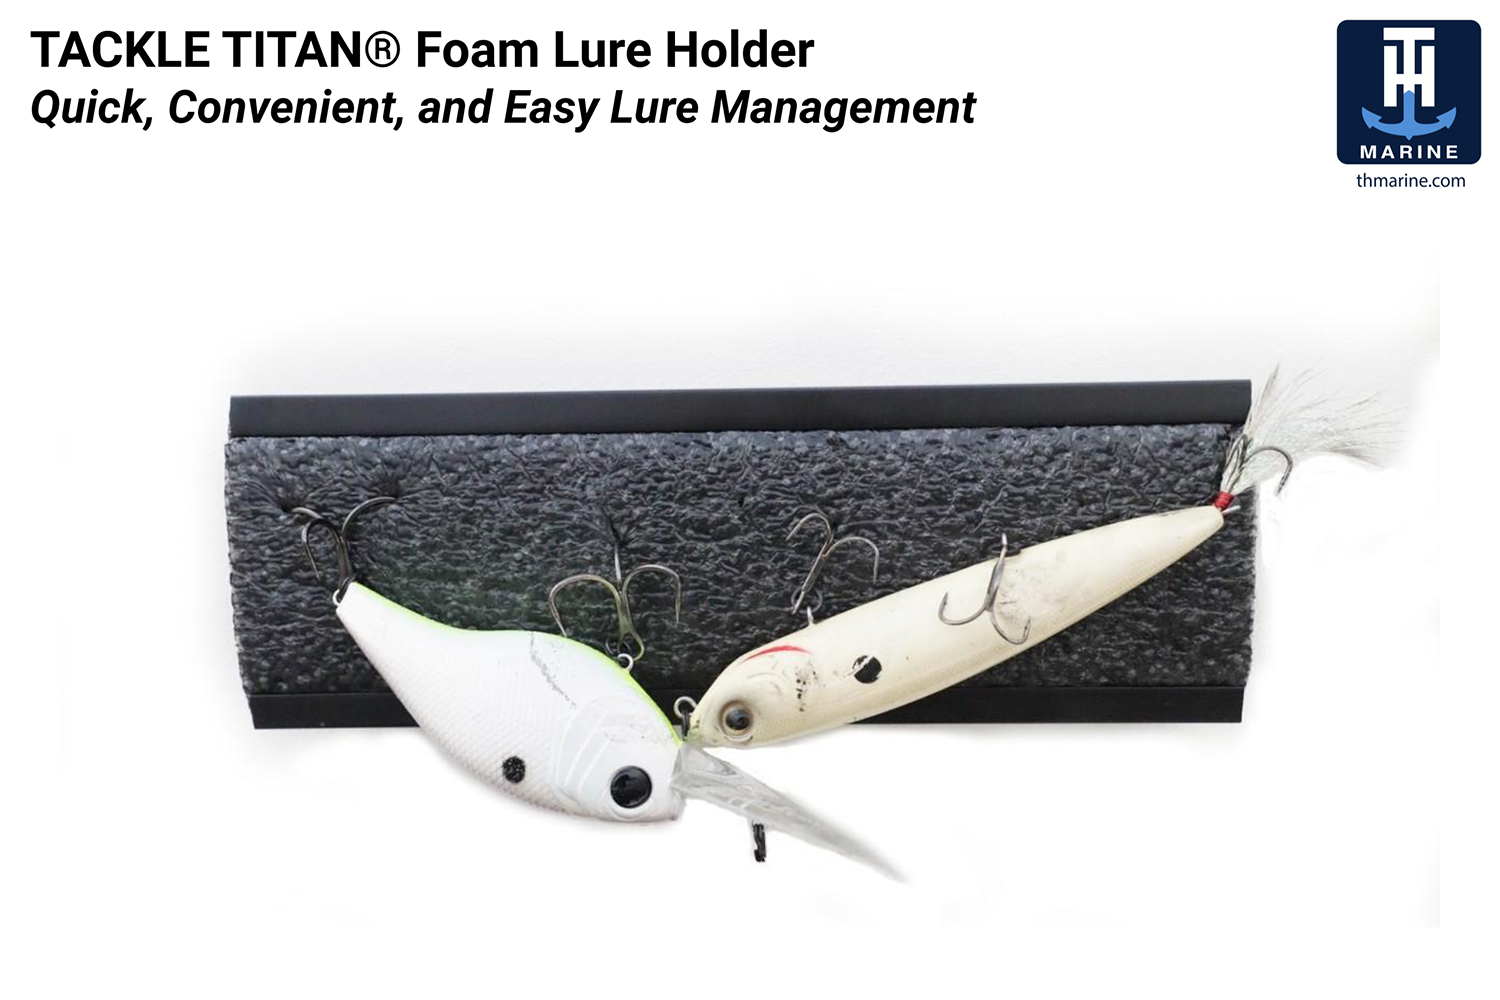 <p><b>Tackle Titan Foam Lure Holder</b></p>
<p>With Tackle Titan management systems for lures and other gear, you can get quick and easy access to all your favorite tackle like never before. Along with the full line of storage options, including hanging racks, magnetic storage racks, accessory caddies, and more, the foam lure holder provides a convenient and effective way to hang your hooks up. With it in use, you wonât have to deal with random hooks on the floor or placed in various cup holders and compartments and you can have a safer and much more productive time on the water.</p>
<p><a href=